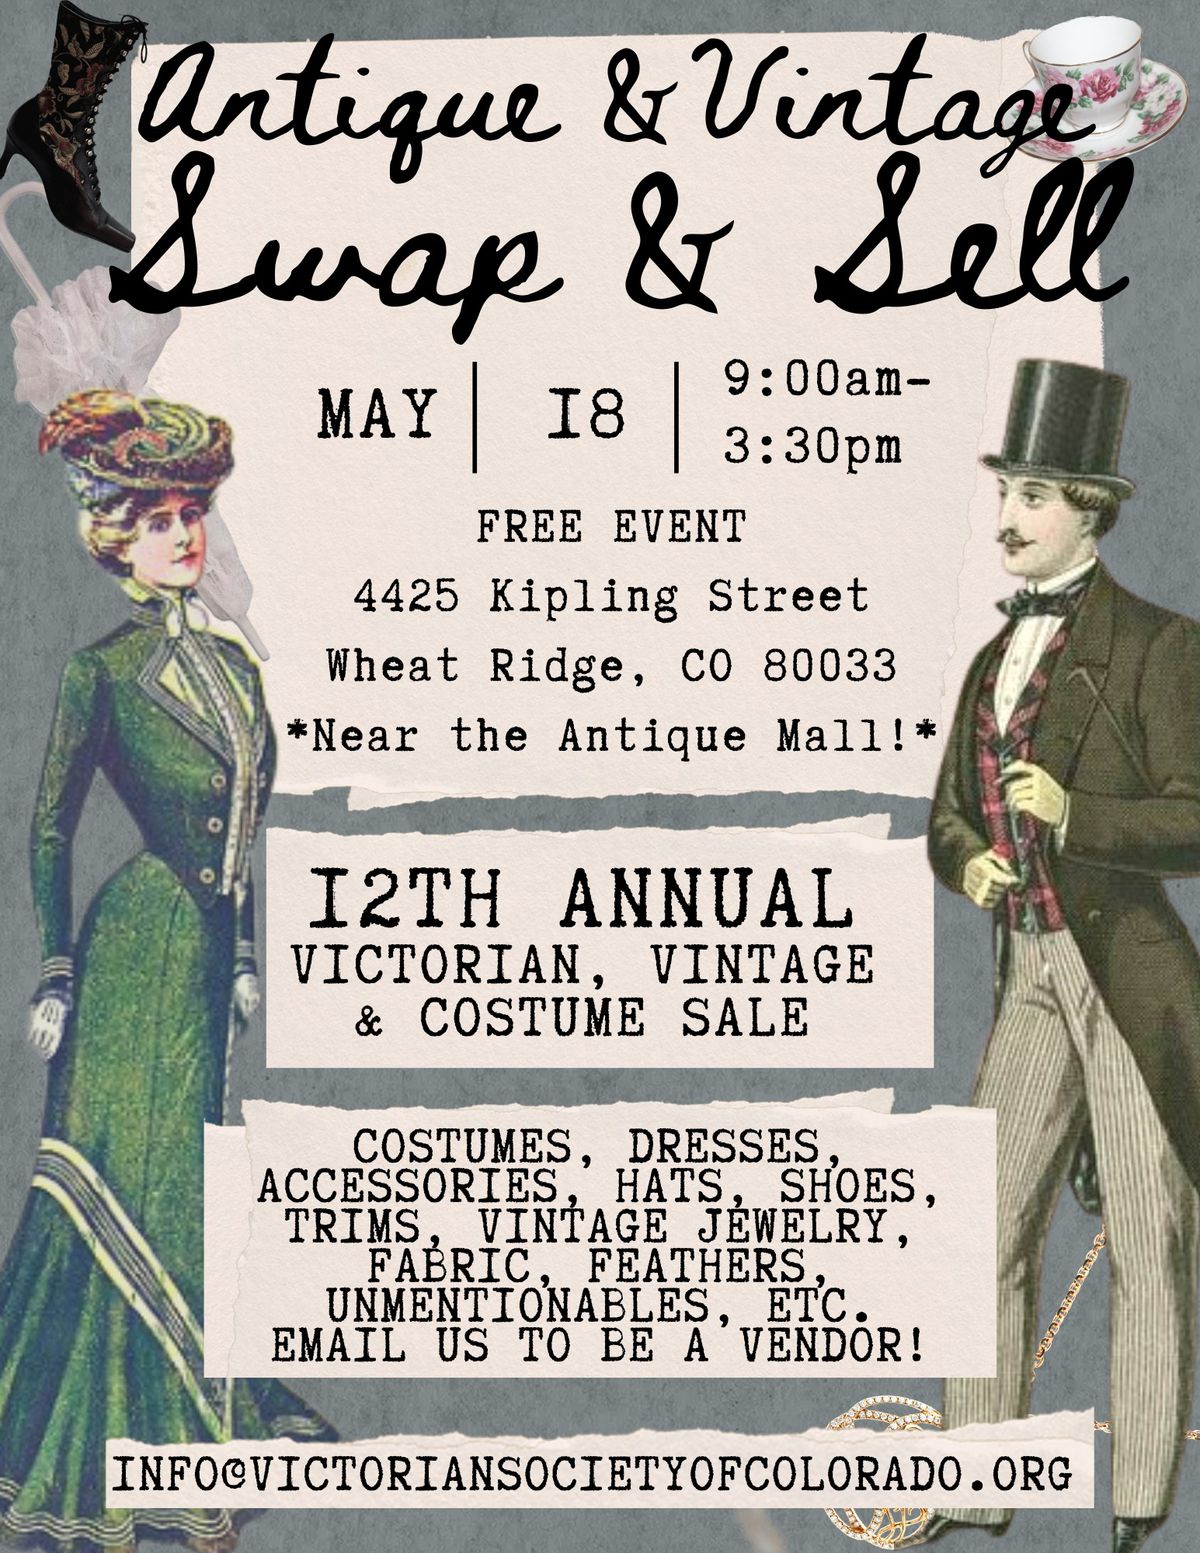 Antique, Vintage, & Costuming Swap & Sell